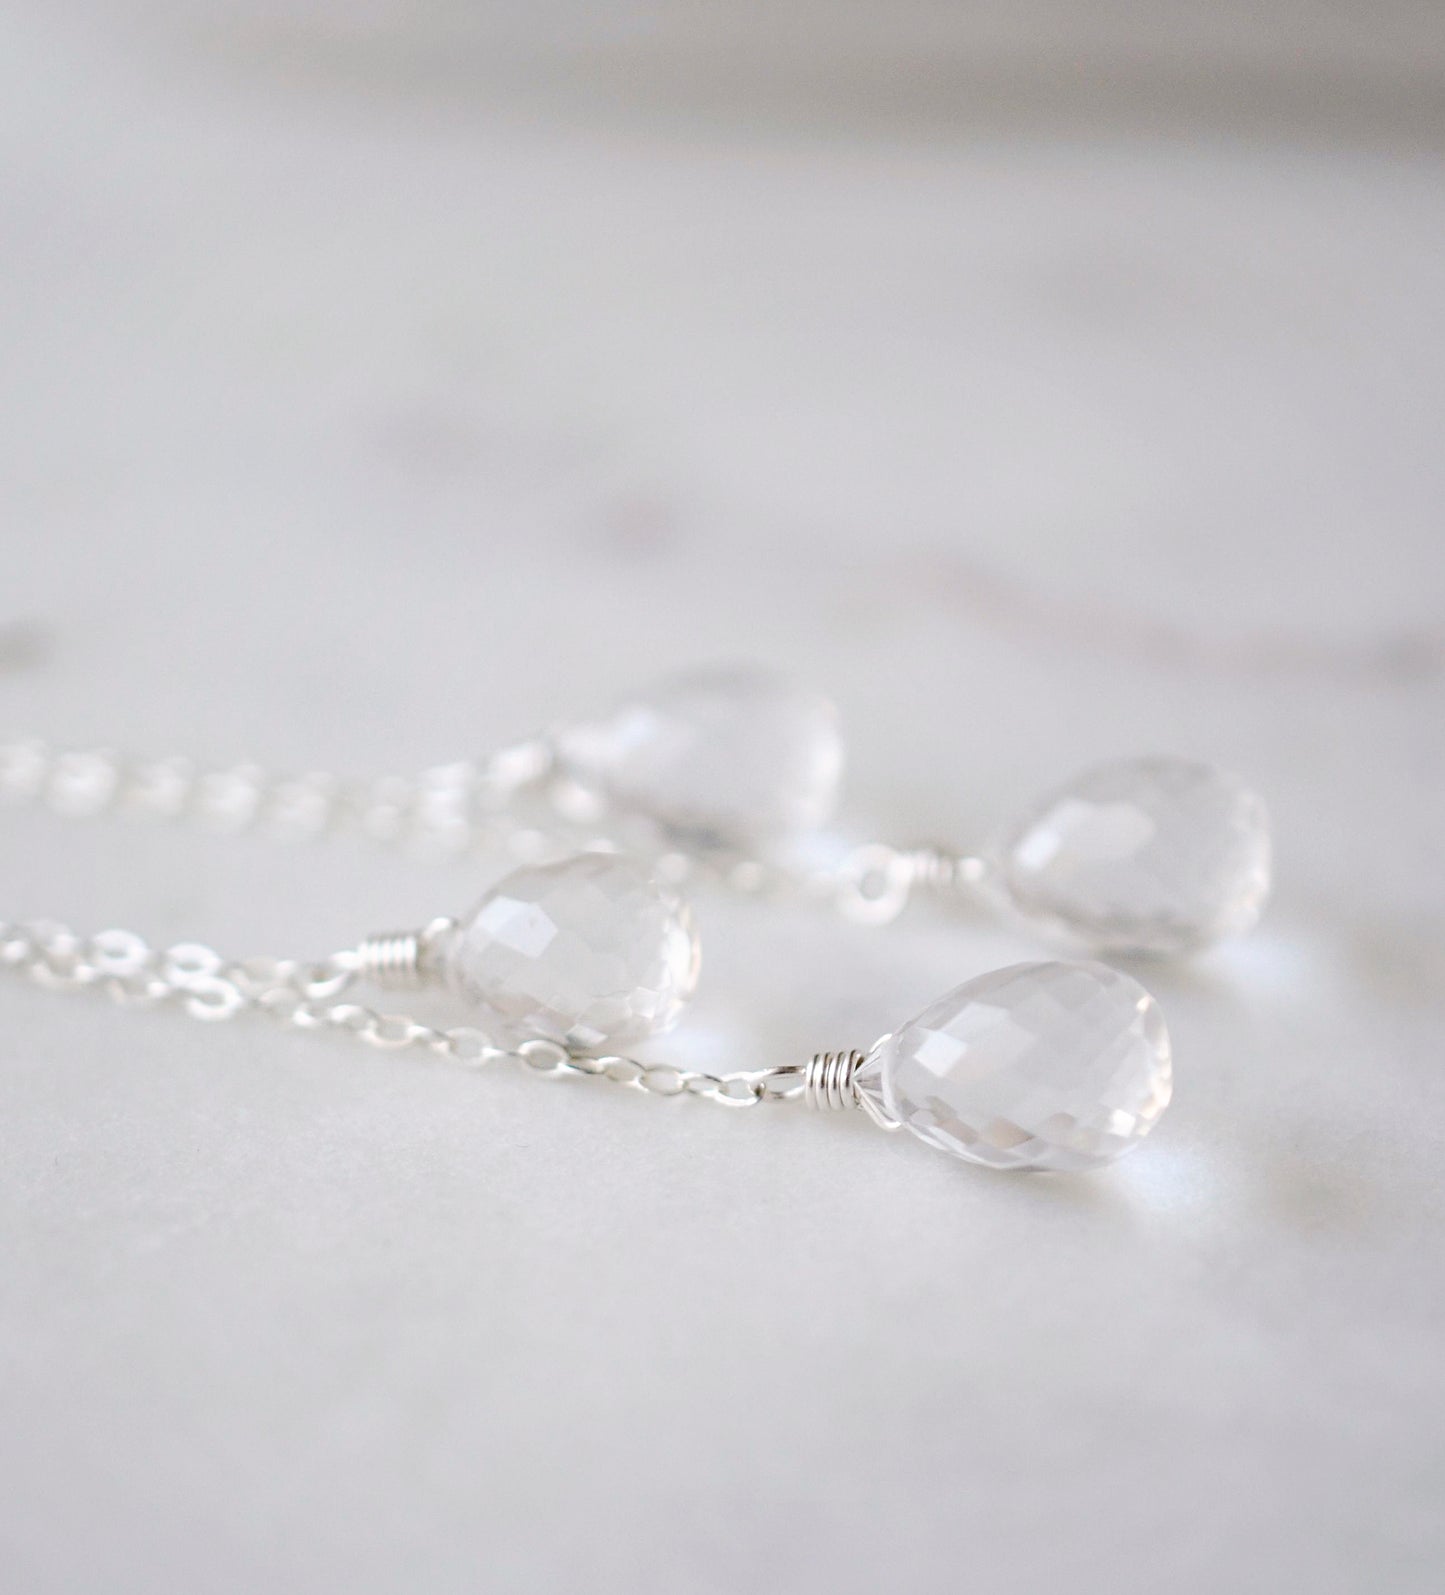 Close up of clear crystal quartz teardrops. Earrings are shown in sterling silver.